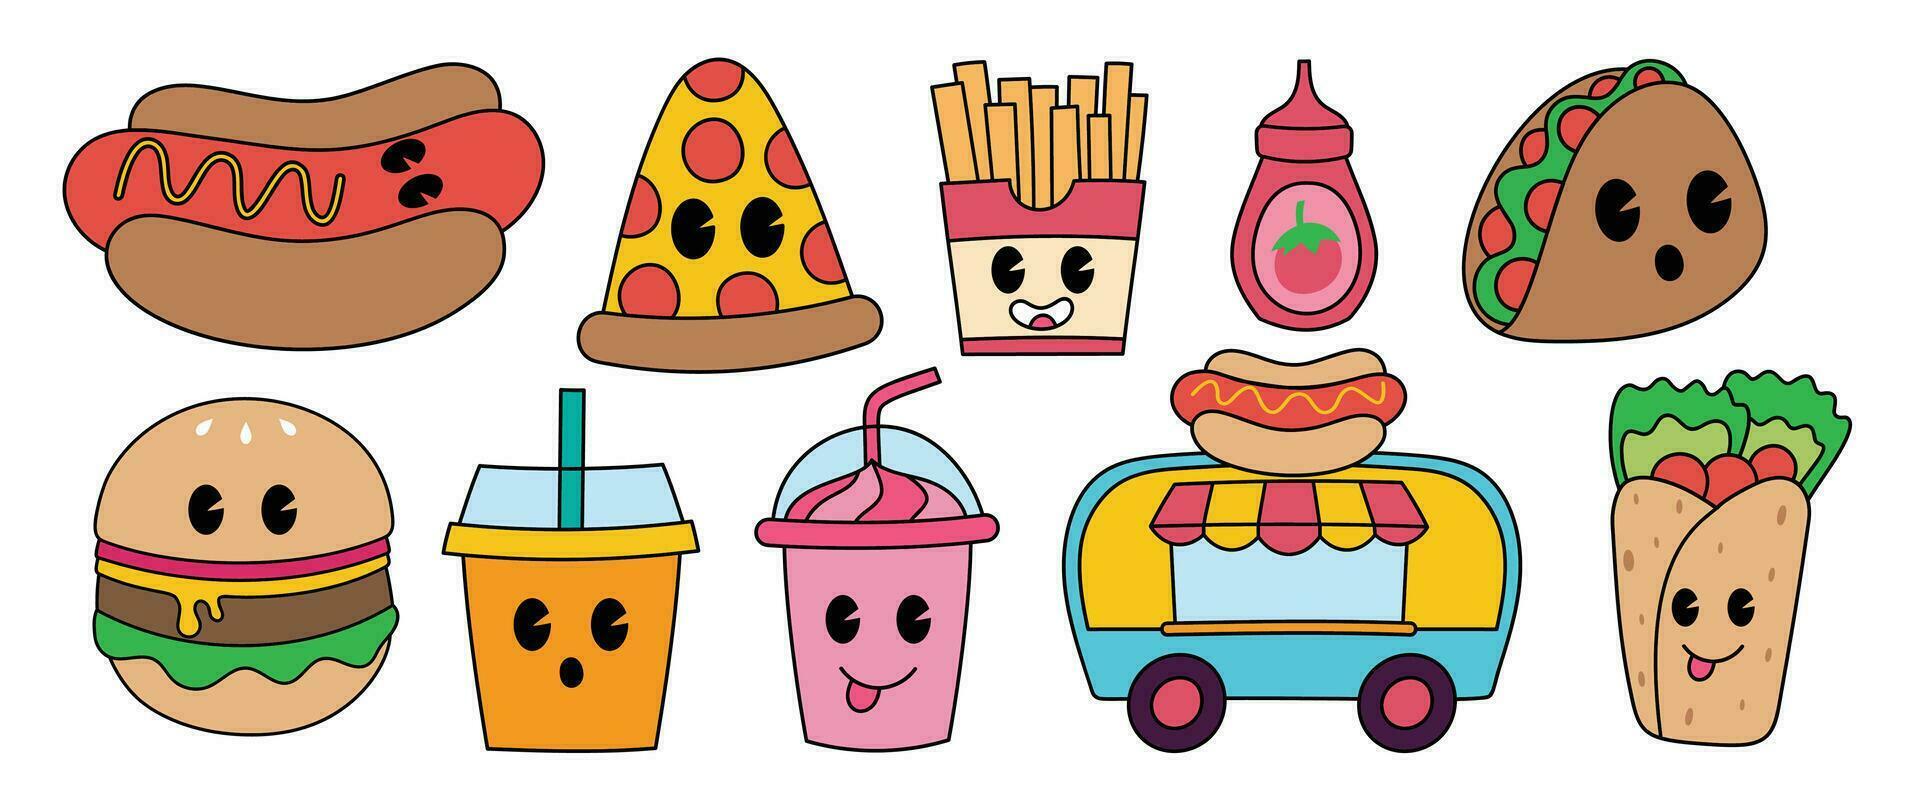 Set of 70s groovy element food truck concept vector. Collection of cartoon character, doodle smile face, hamburger, pizza, taco salad, smoothie. Cute retro groovy hippie design for decorative, sticker vector